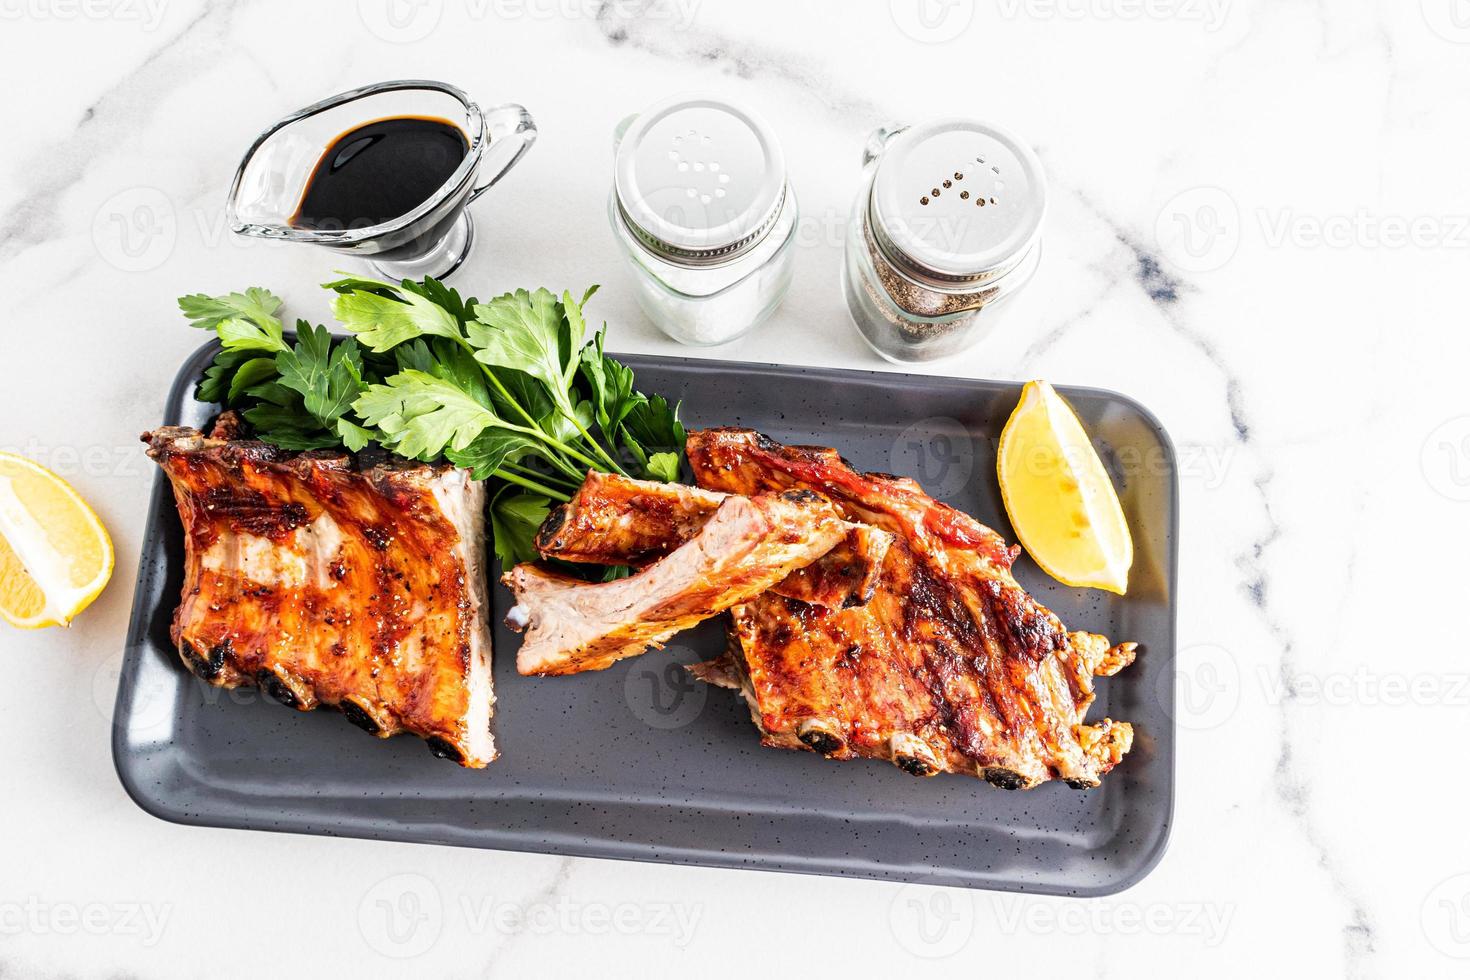 pork ribs grill on a ceramic dark tray with ingredients on a white factual background. exquisite food for barbecue lovers. photo